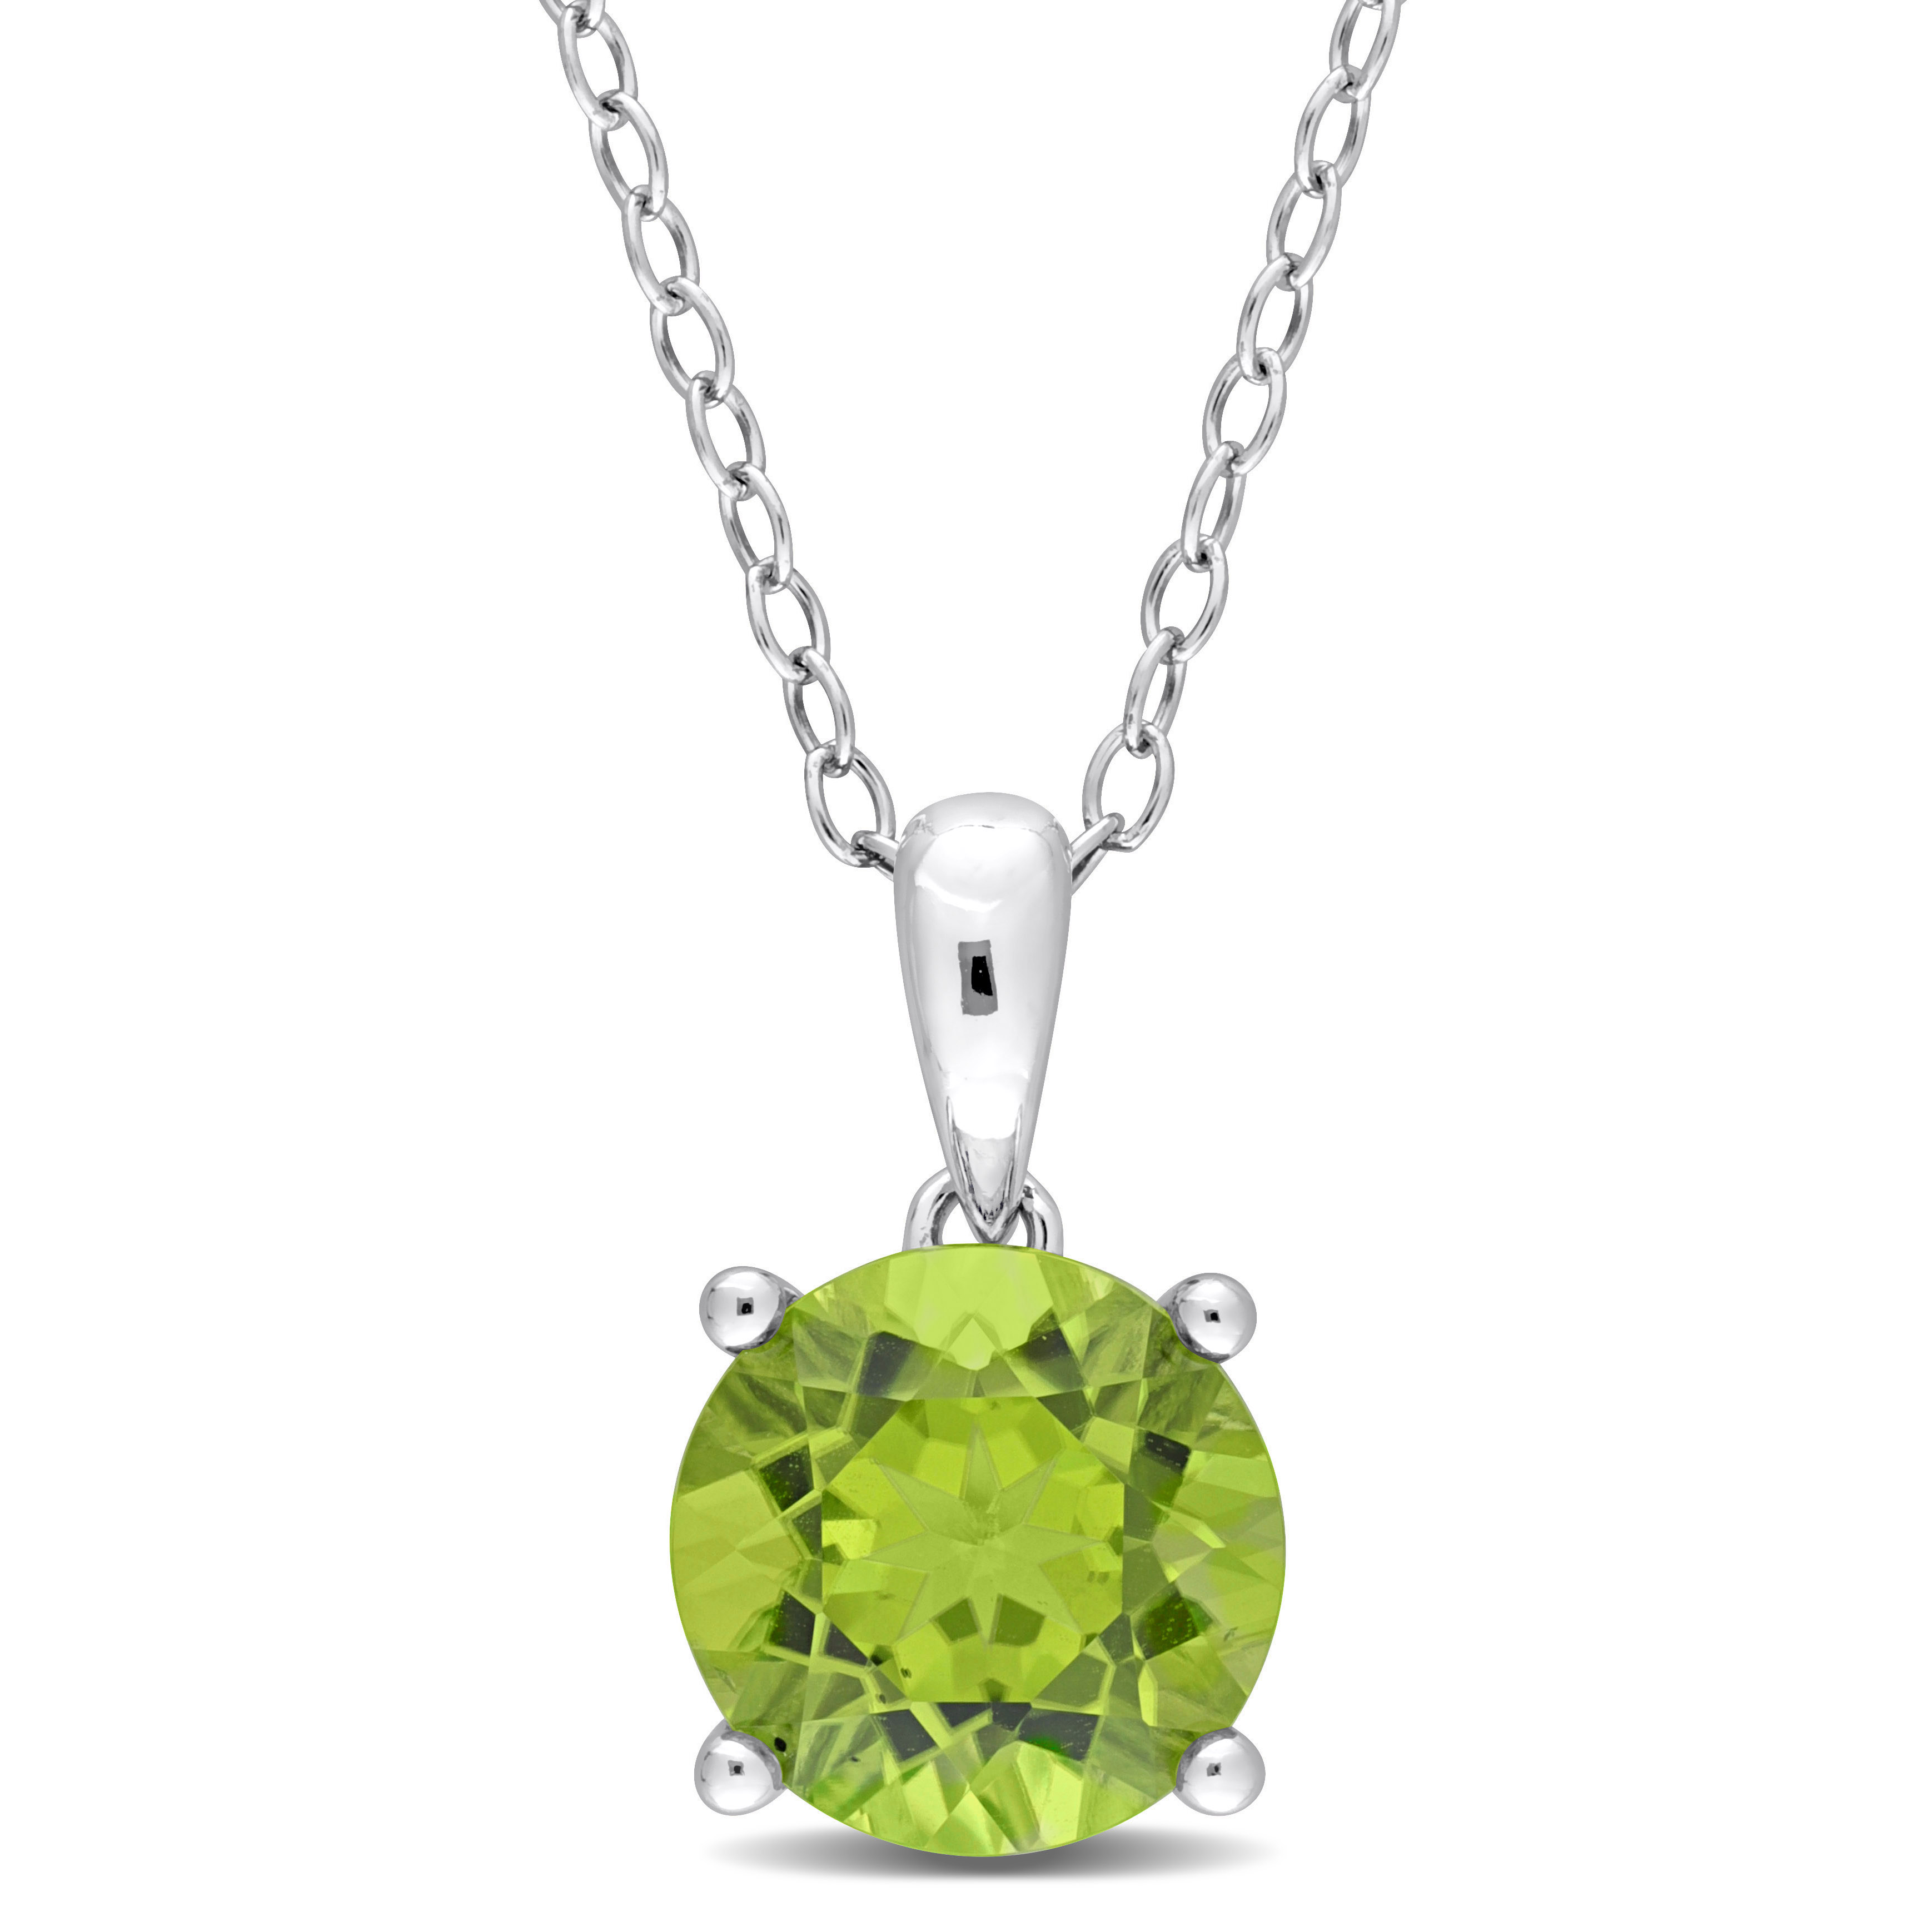 2 CT TGW Peridot Solitaire Heart Design Pendant with Chain in Sterling Silver - 18 in.